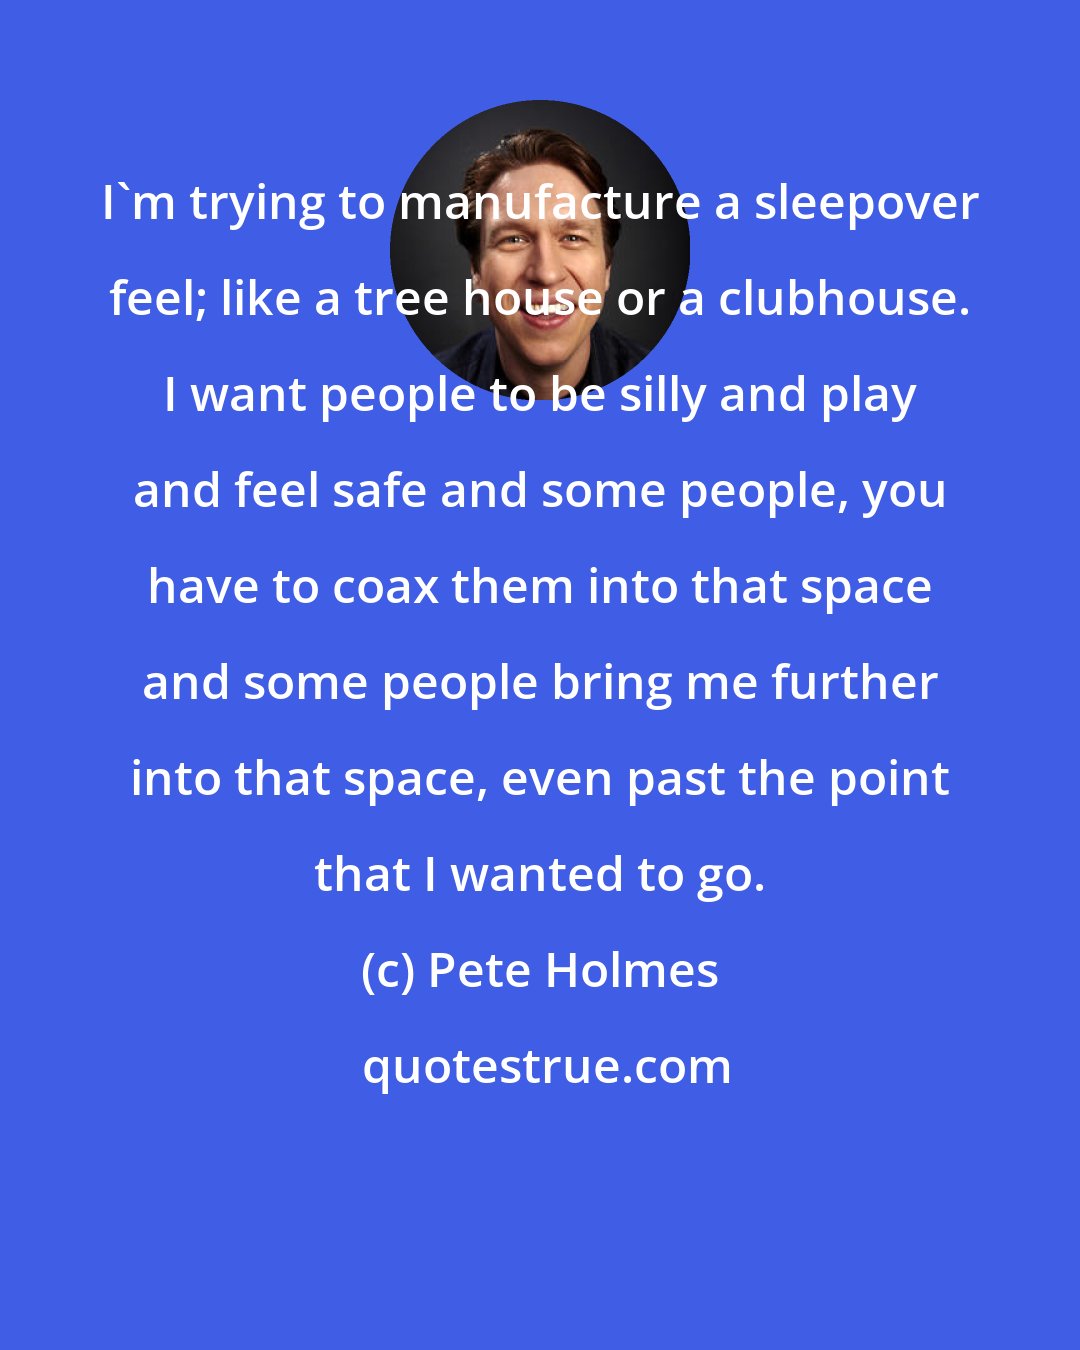 Pete Holmes: I'm trying to manufacture a sleepover feel; like a tree house or a clubhouse. I want people to be silly and play and feel safe and some people, you have to coax them into that space and some people bring me further into that space, even past the point that I wanted to go.